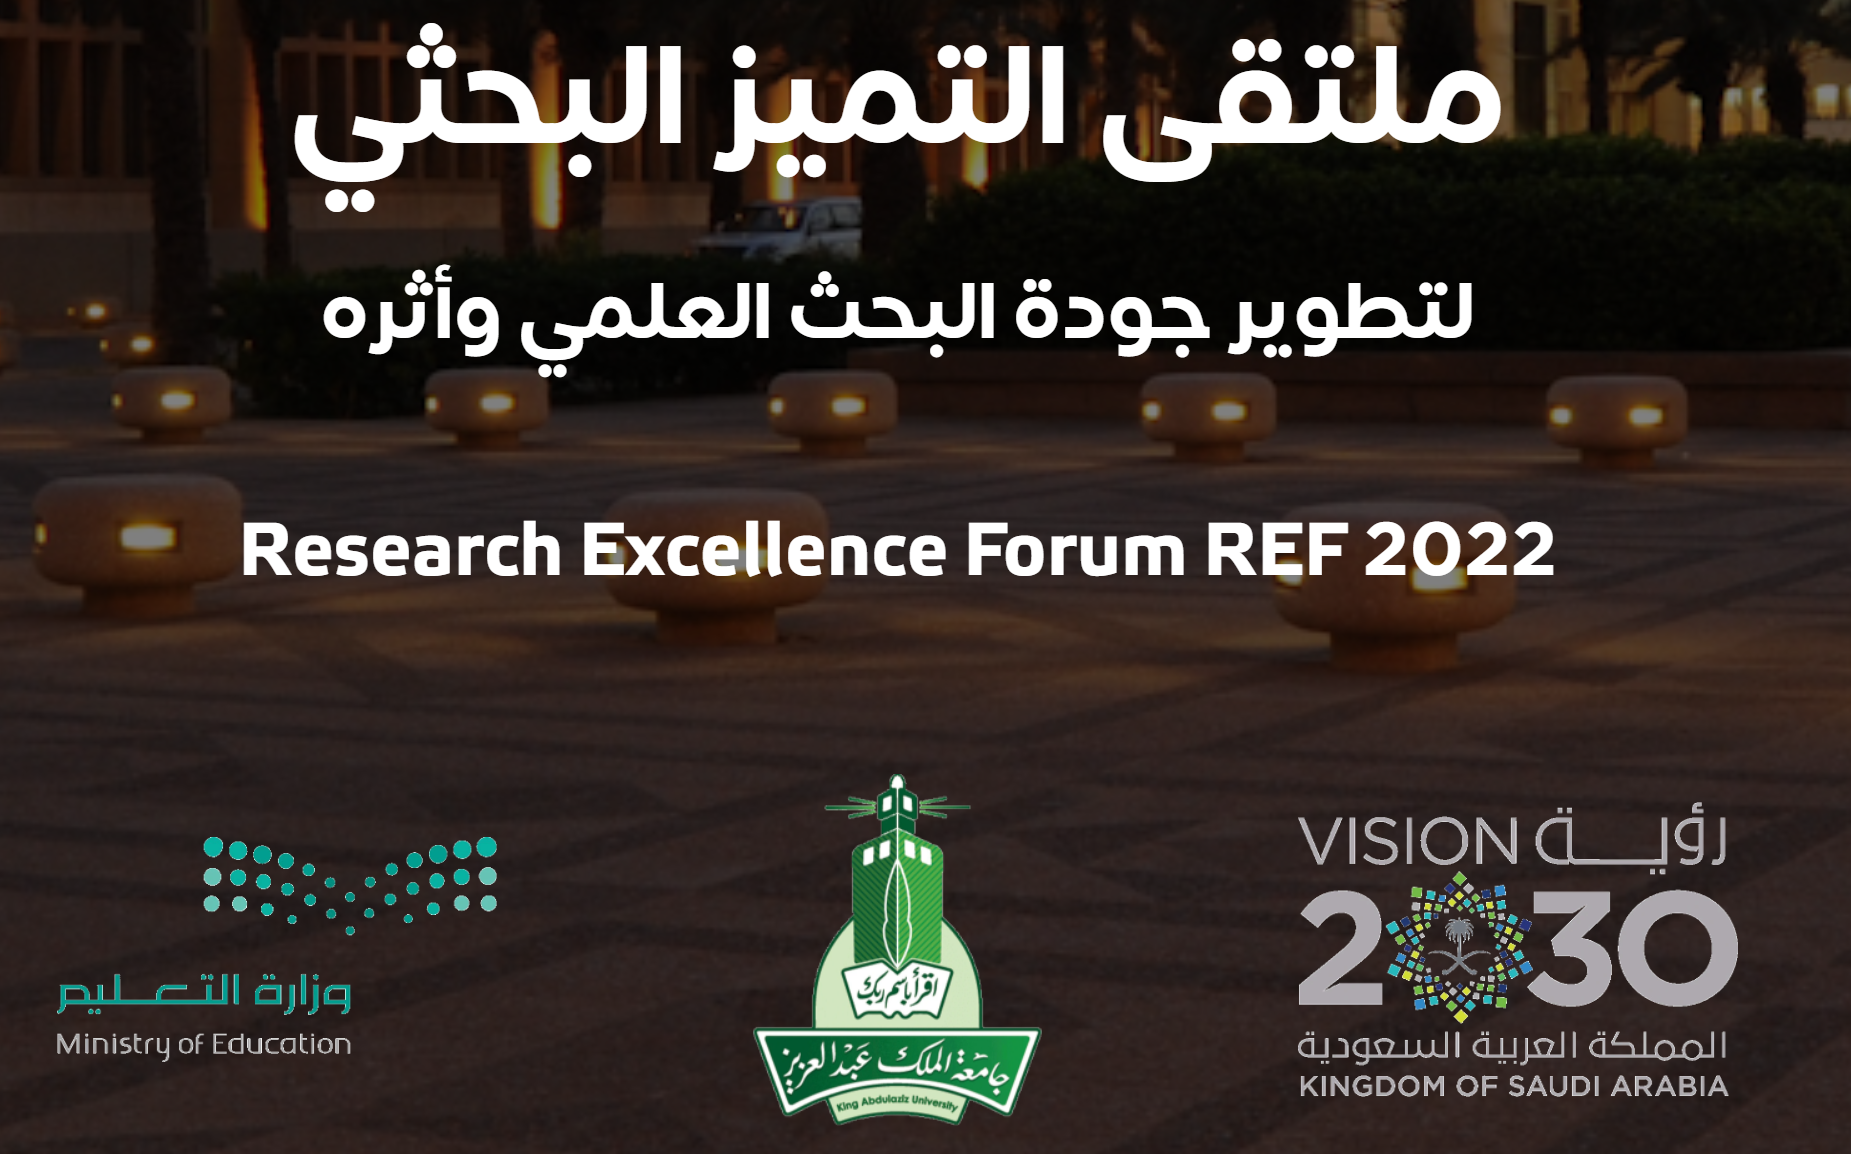 The university participates in the Research Excellence Forum at King Abdulaziz University